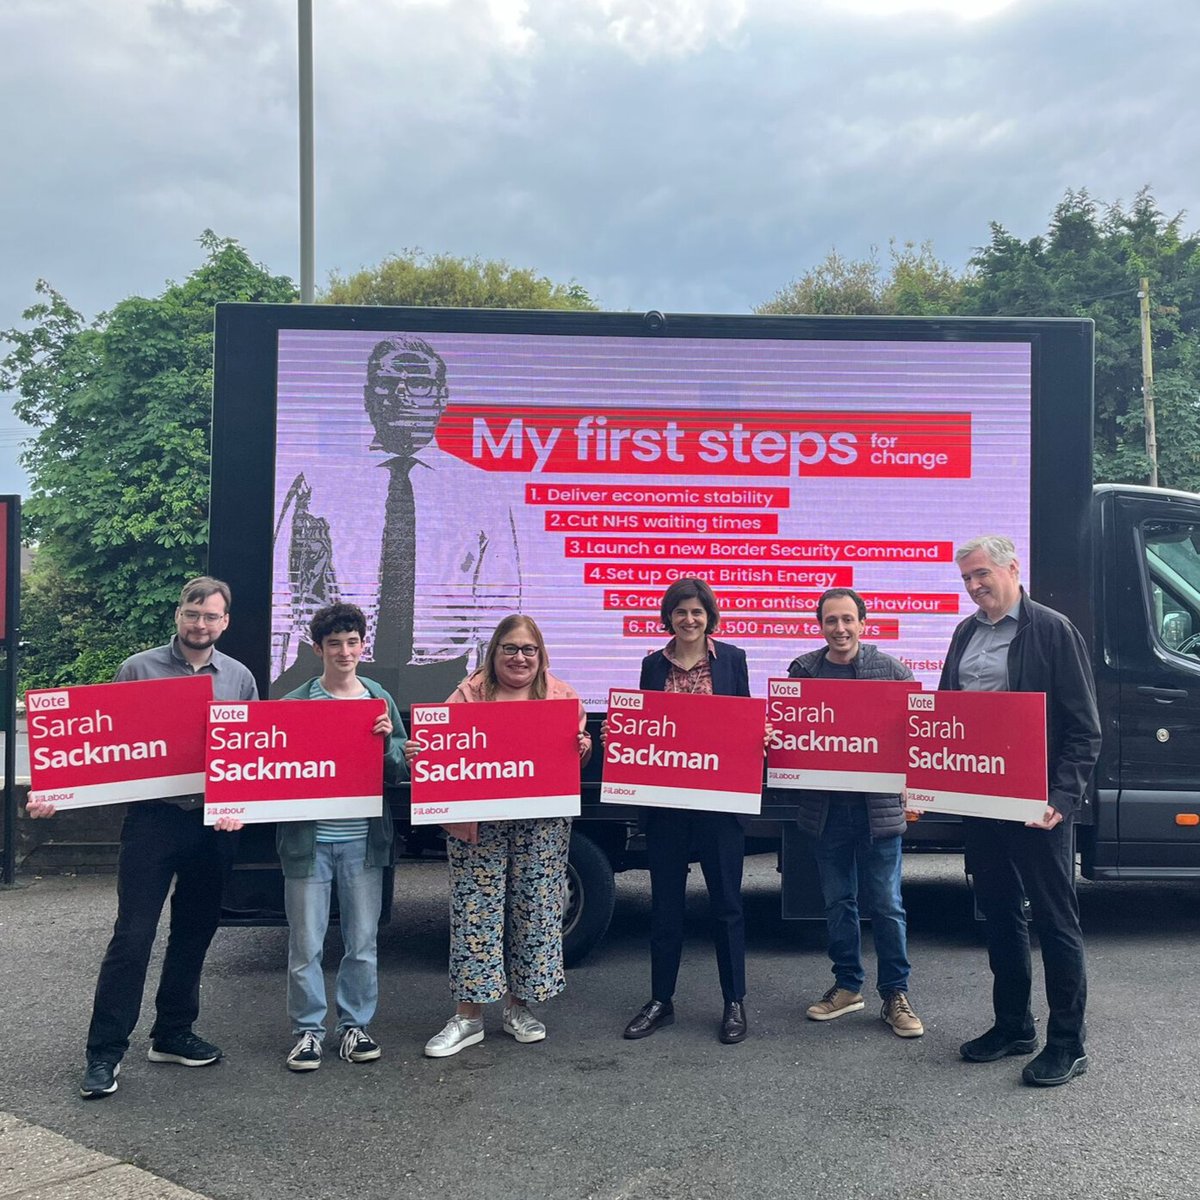 📌  Spotted in Finchley and Golders Green!

Labour’s parliamentary candidate @sarahsackman alongside Labour’s first steps for change.